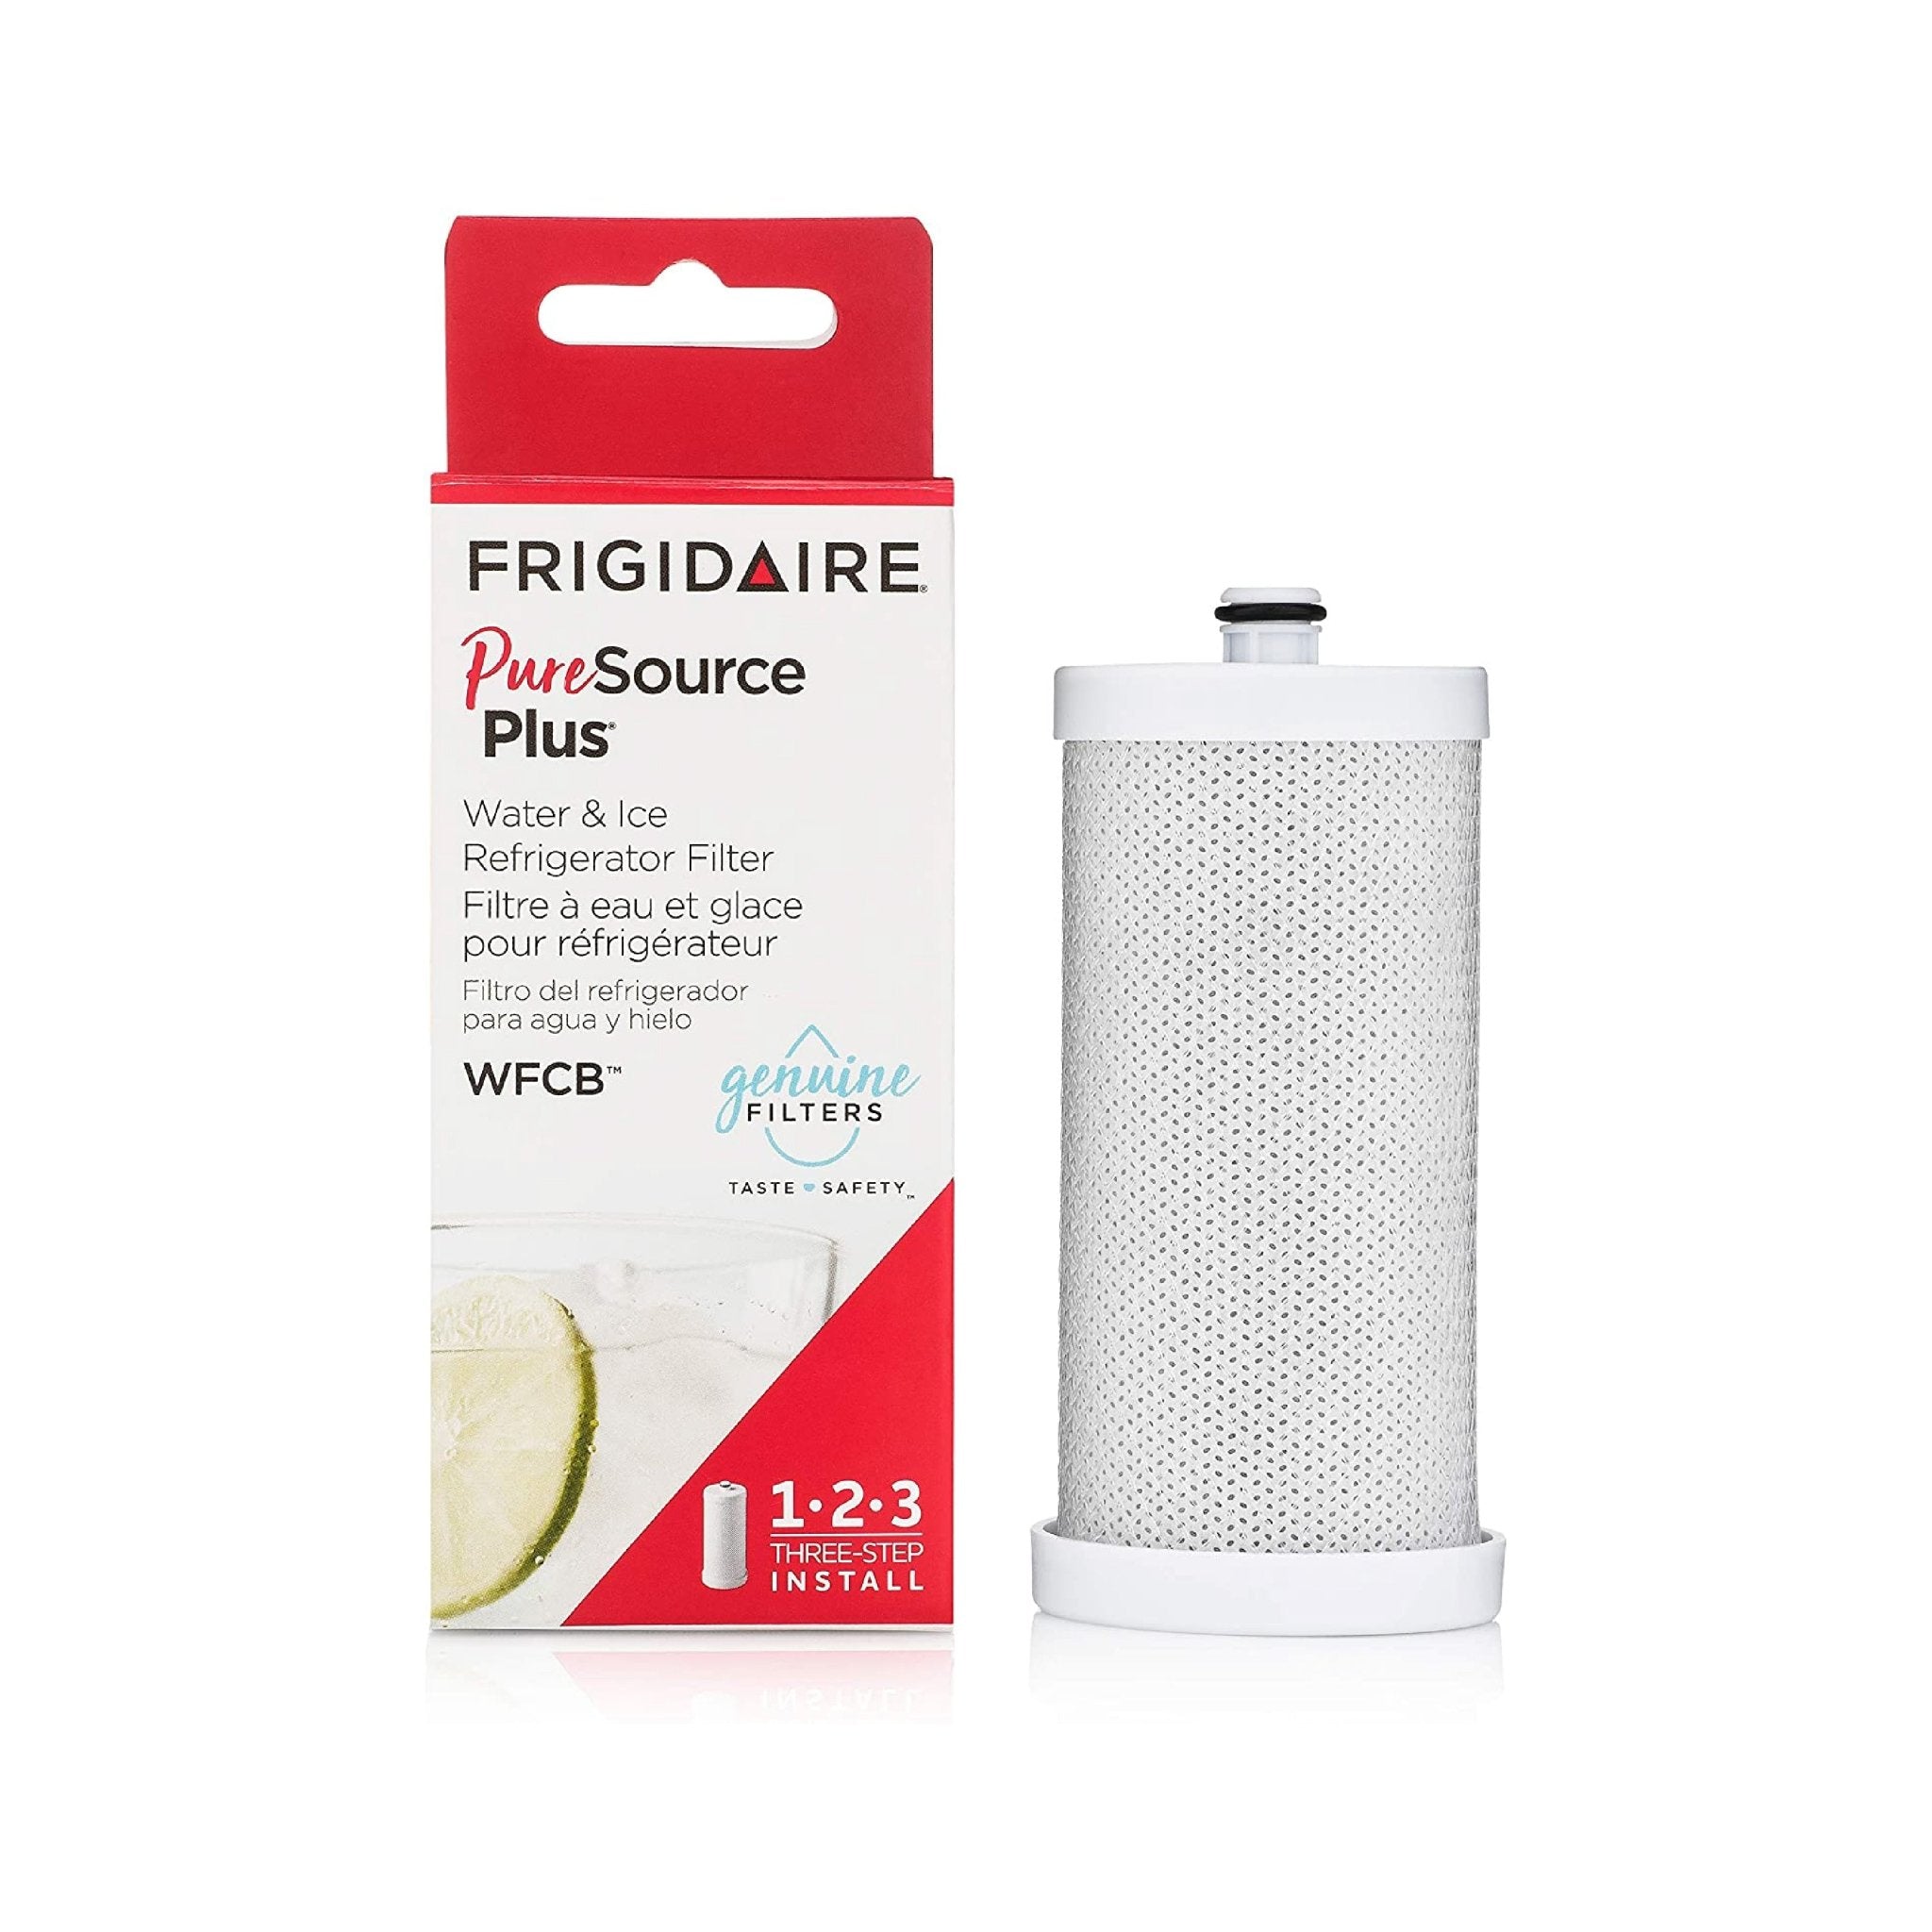 Frigidaire PureSource ULTRAWF PAULTRA Refrigerator Water & Air Filter Combo (Pack of 2)